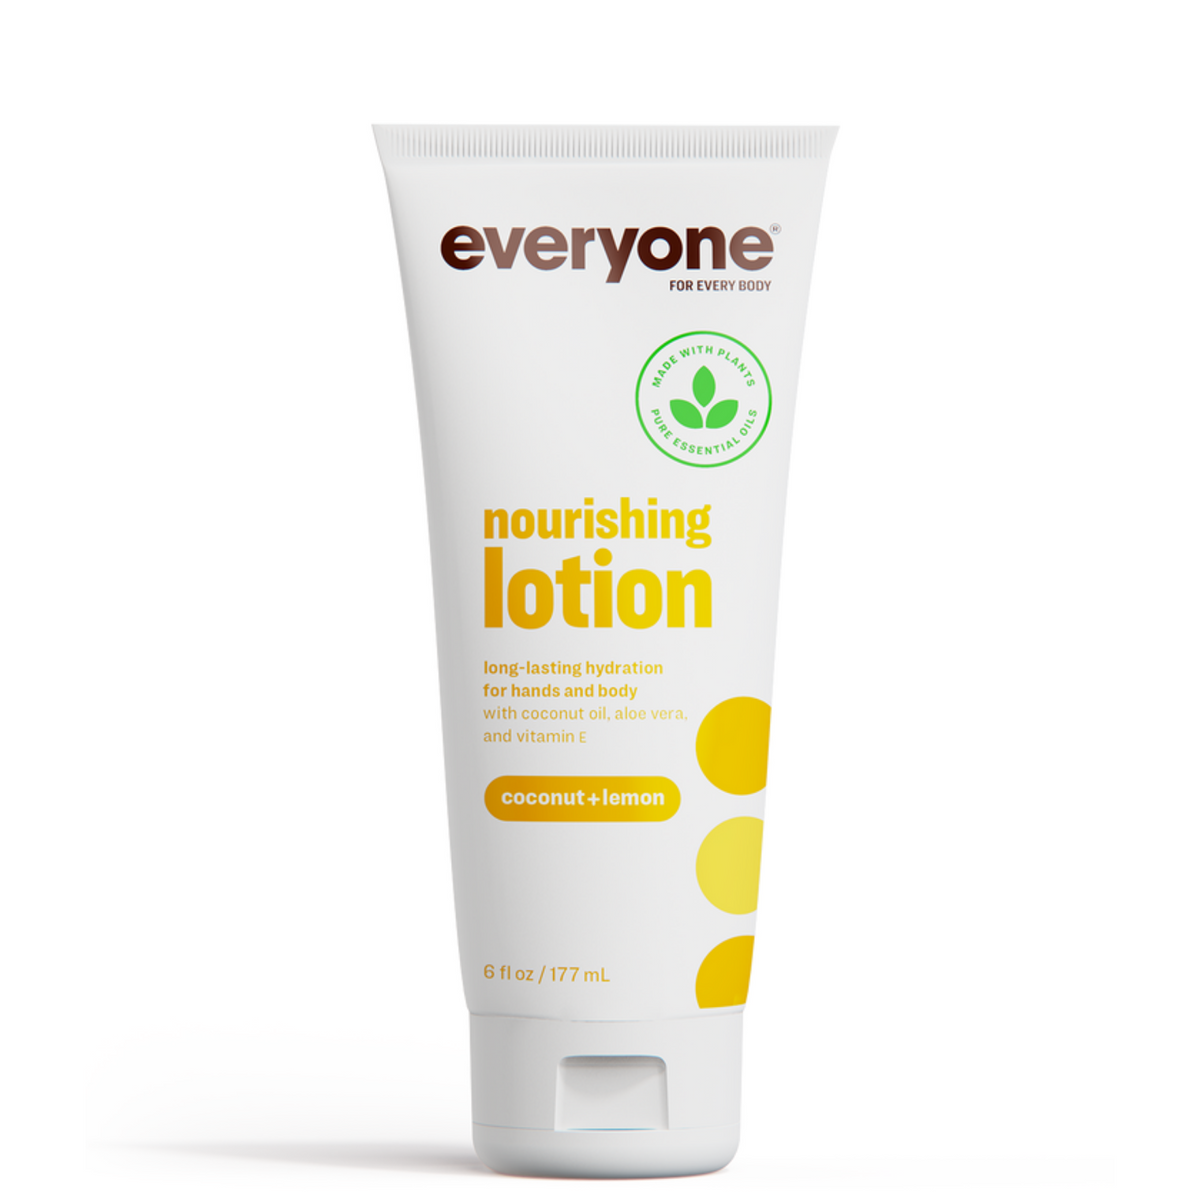 Primary Image of Coconut + Lemon 2 in 1 Lotion